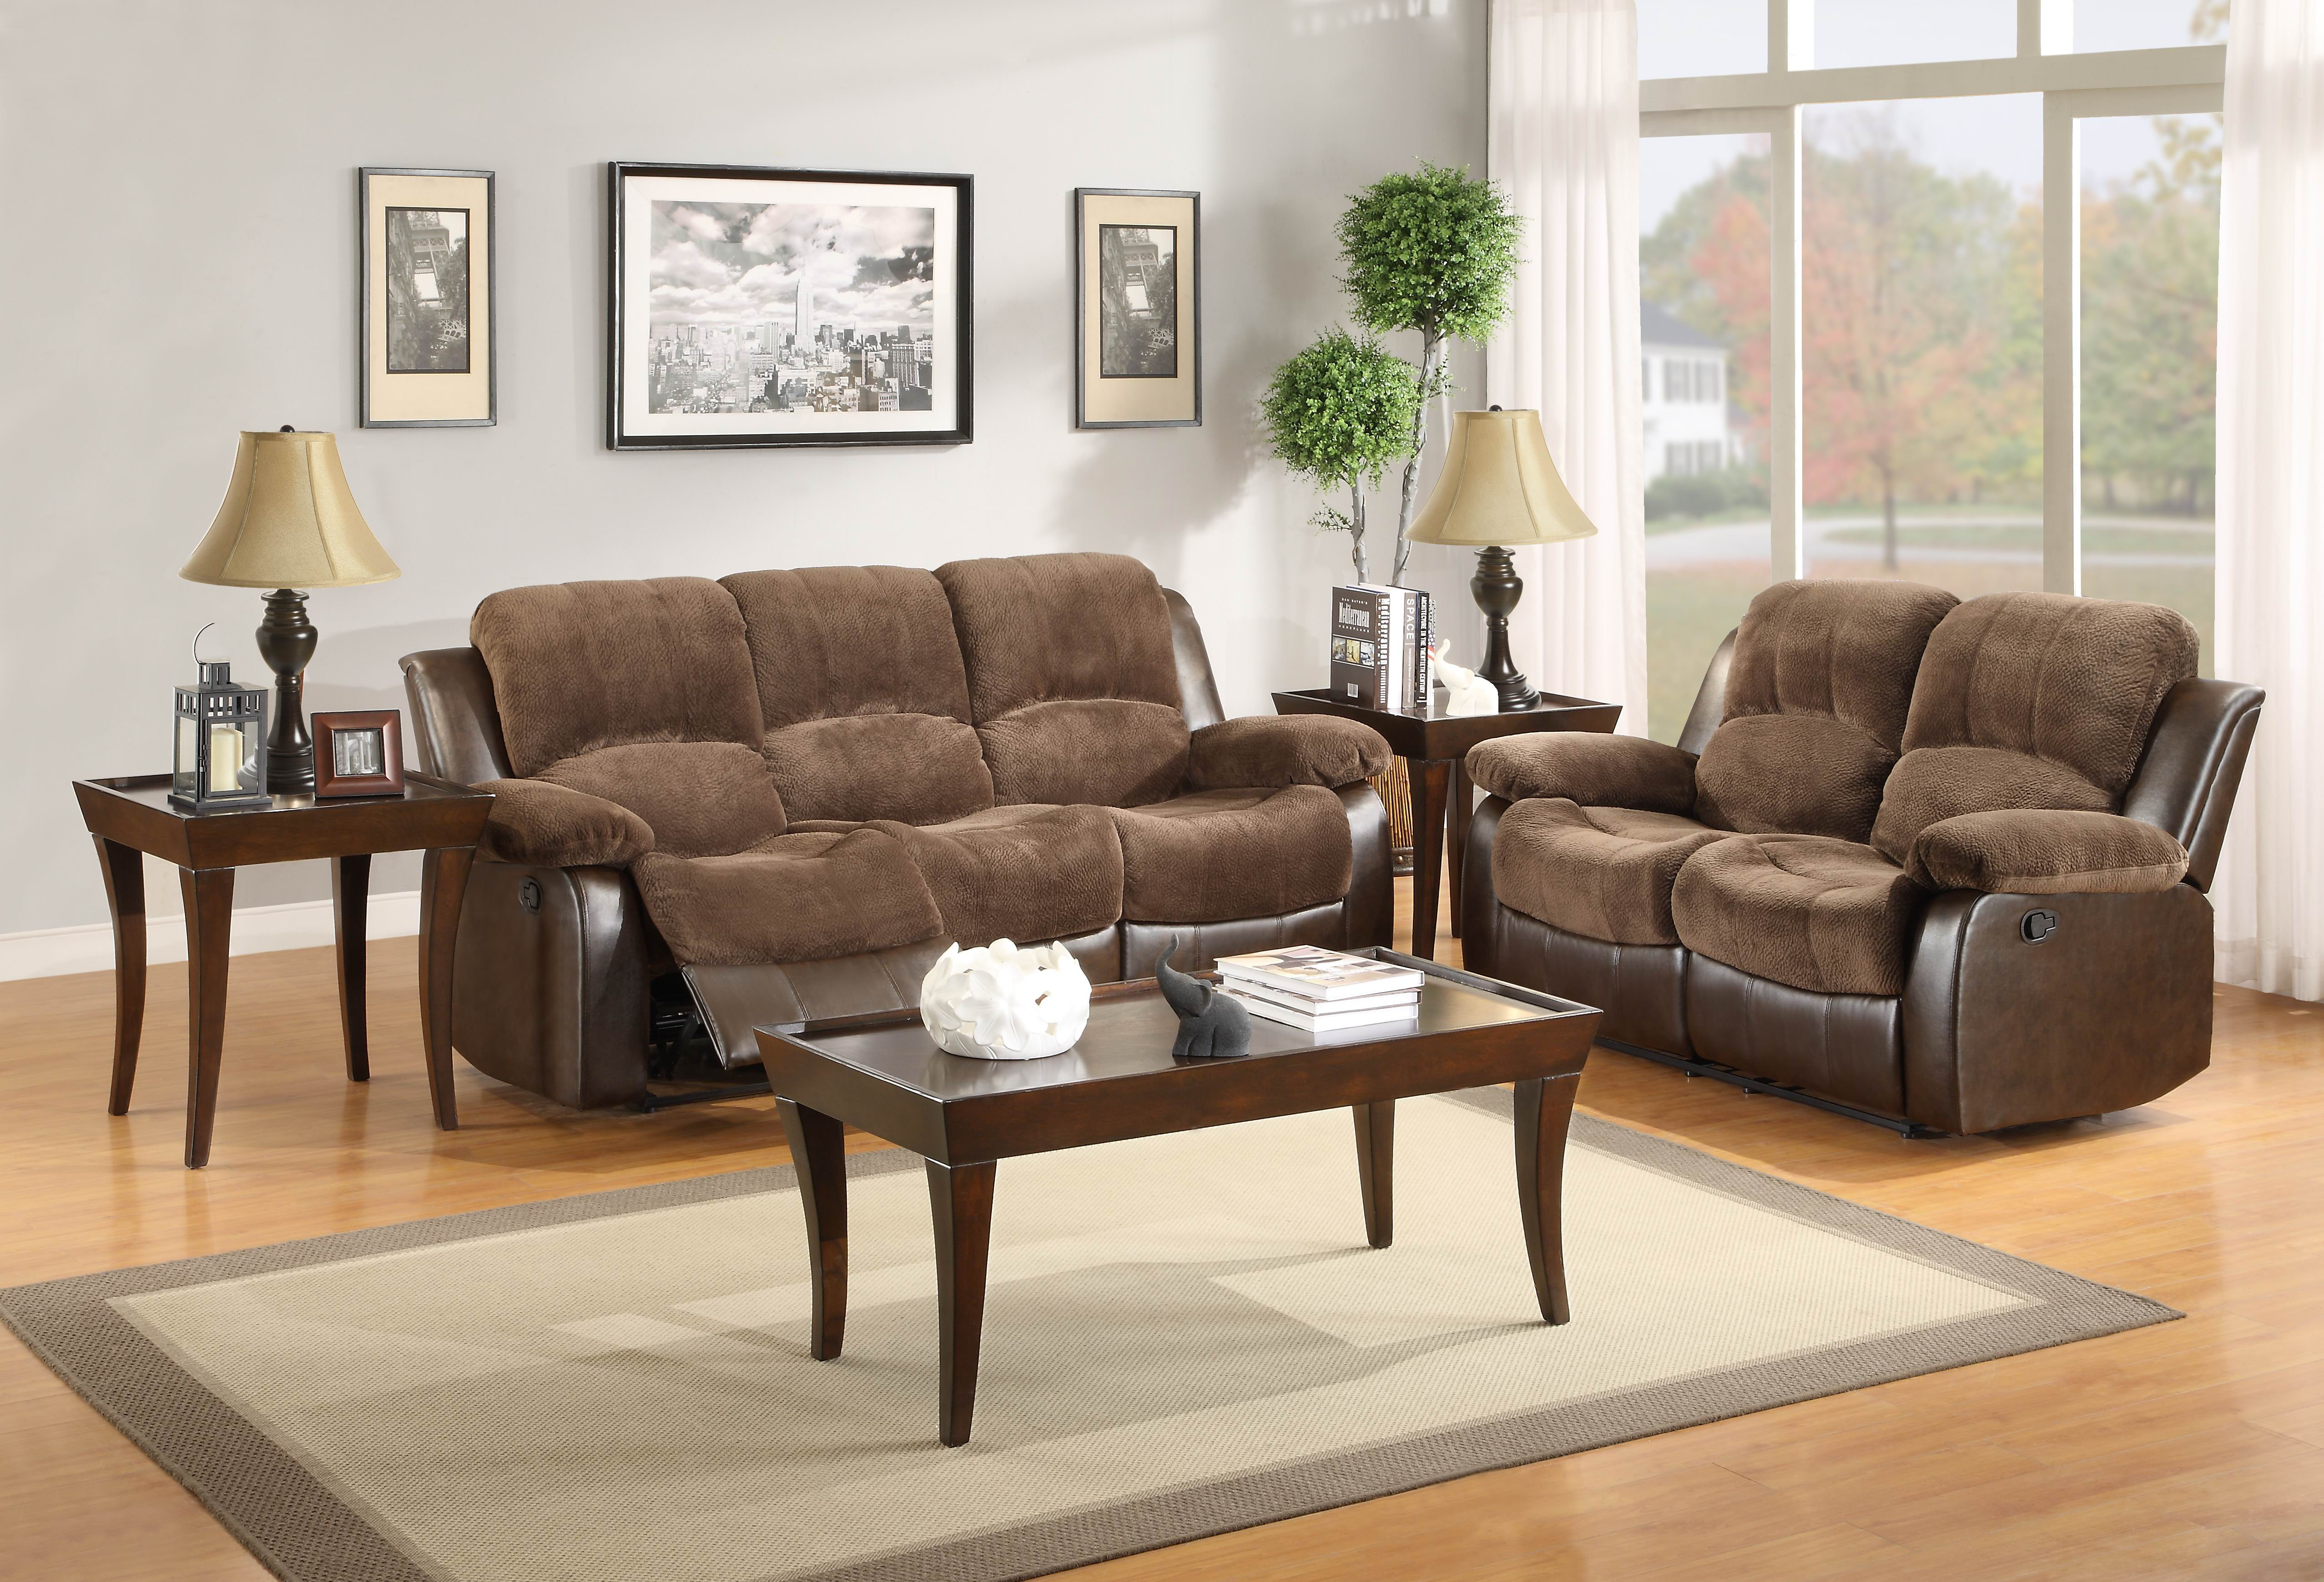 Welling Reclining Configurable Genuine Leather Living Room Set